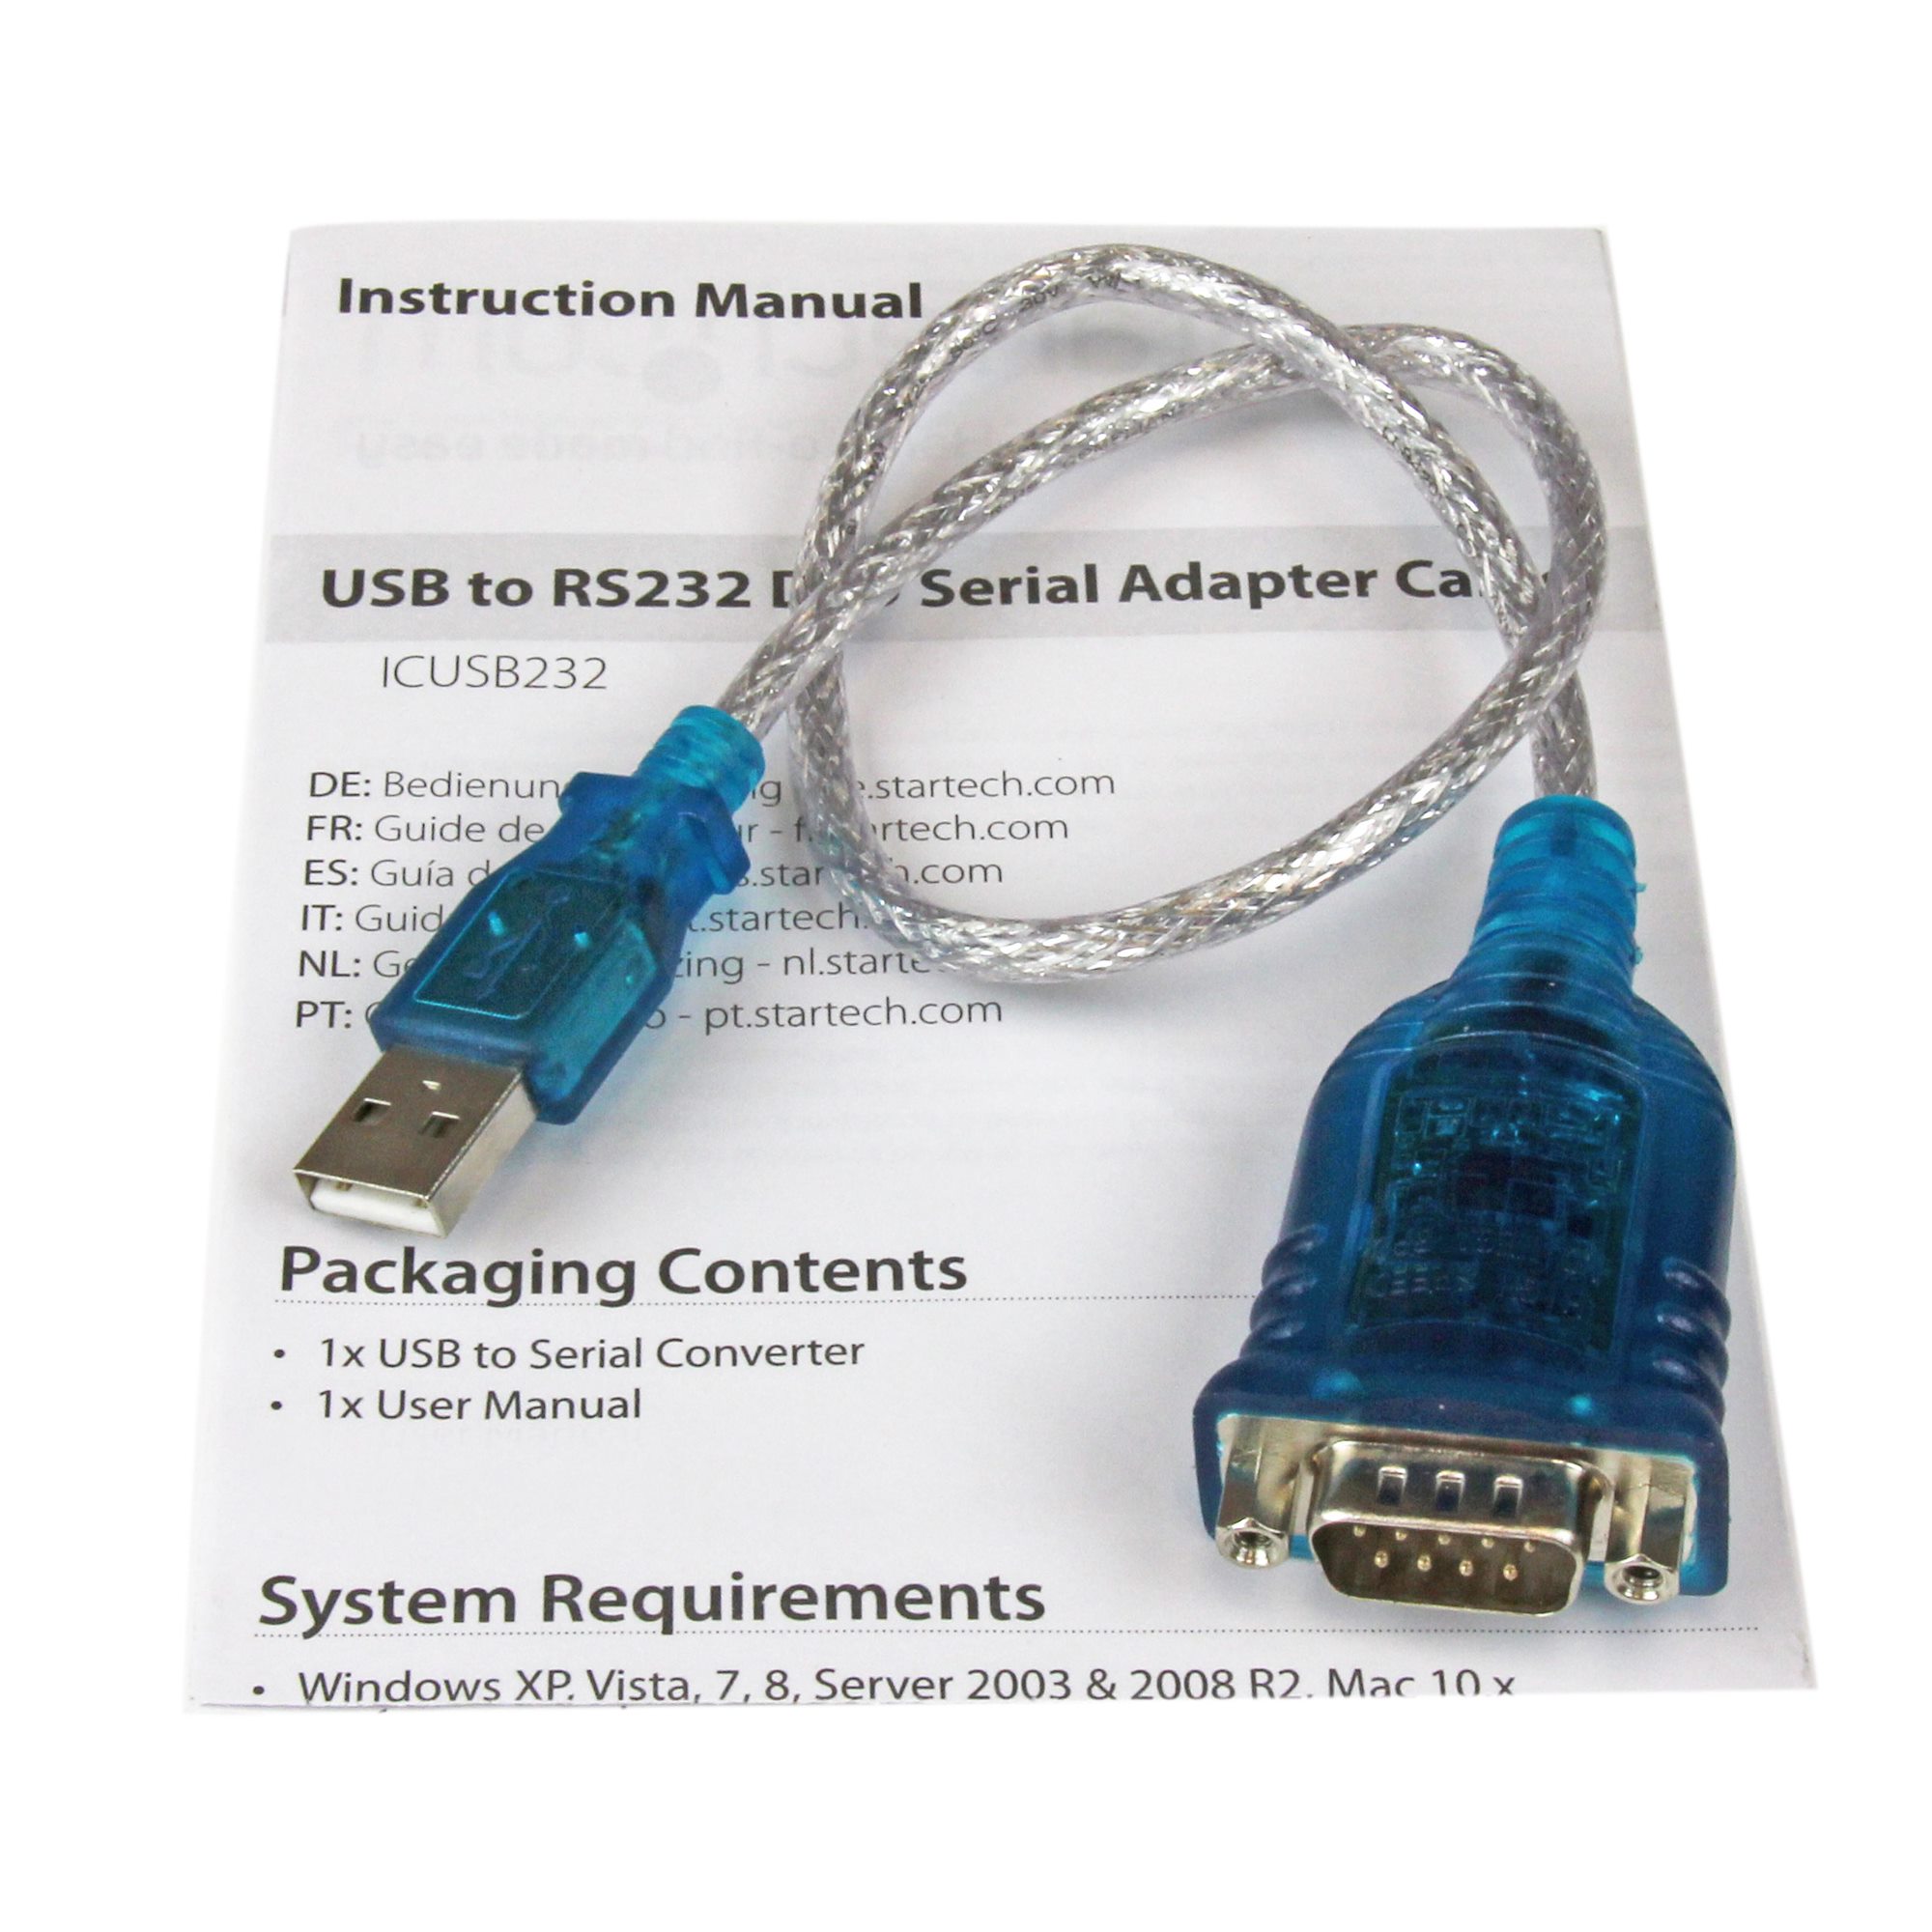 USB to RS232 DB9 Serial Adapter - Serial Cards & Adapters StarTech.com